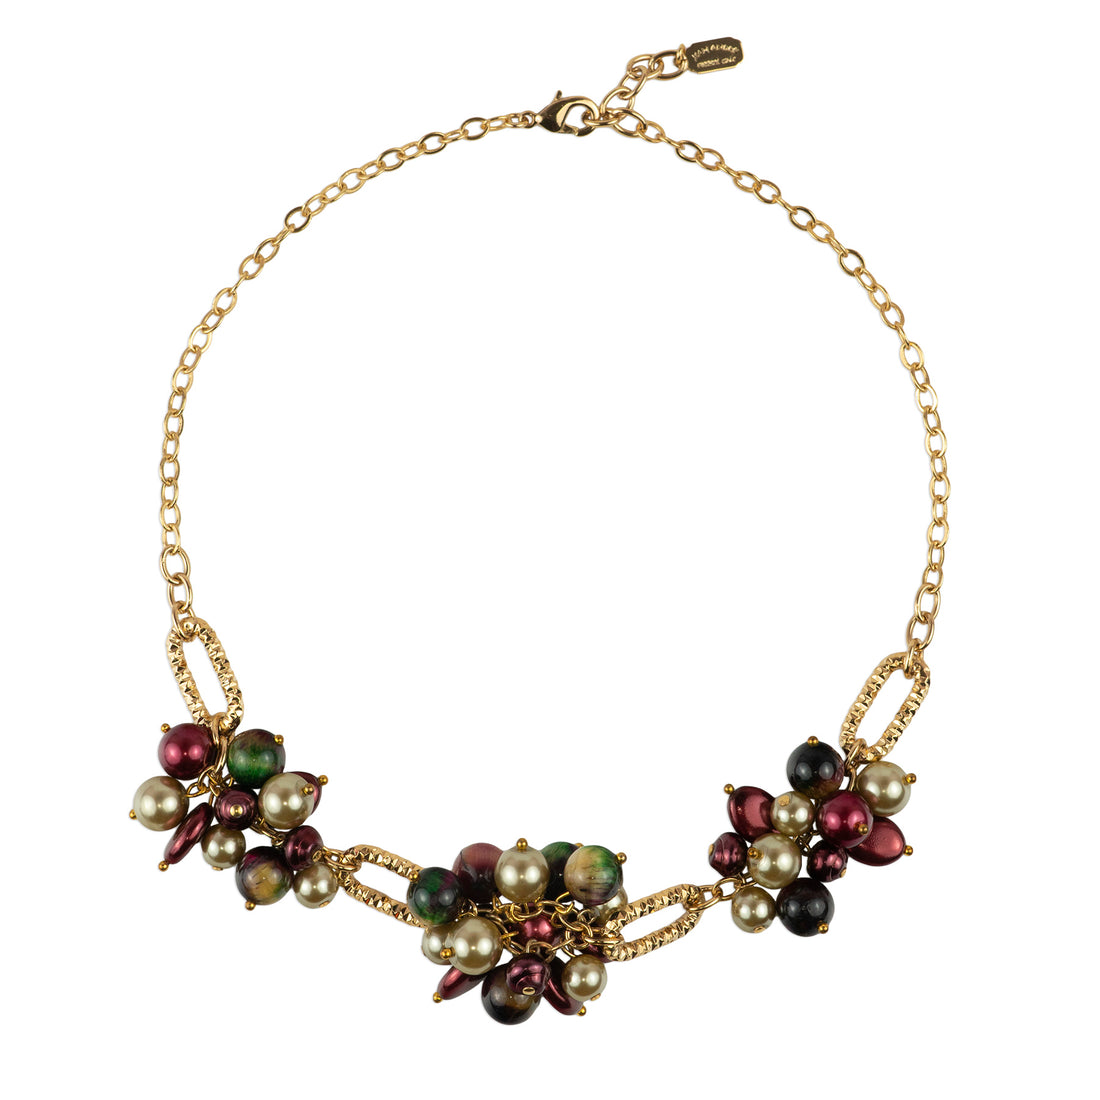 Chain choker necklace with clusters of semi-precious stones and pearls